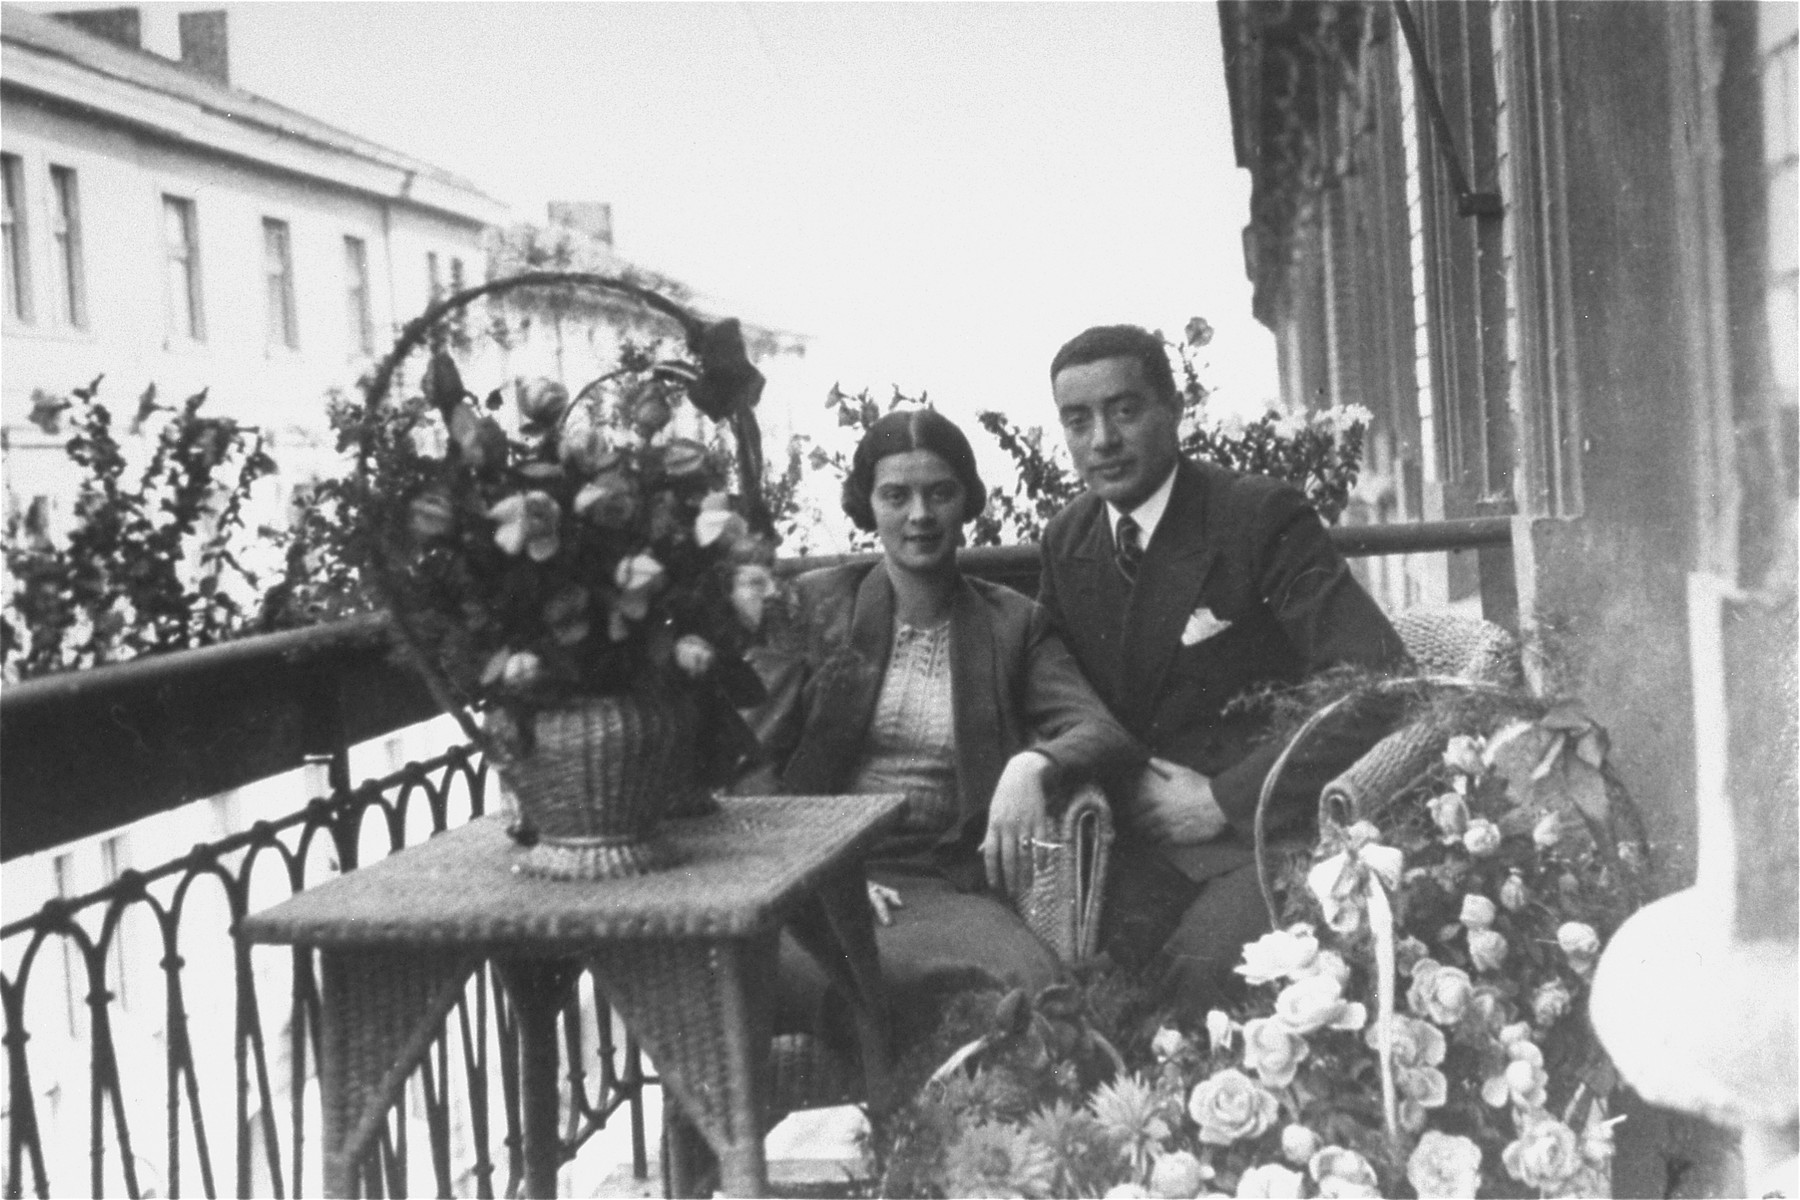 Portrait of a Jewish couple on a balcony in Rzeszow, Poland during their engagement party. 

Pictured are Mina Nattel and Beno Schmelkis. During the war Mina, Beno and their daughter Rachel were killed by the Germans.